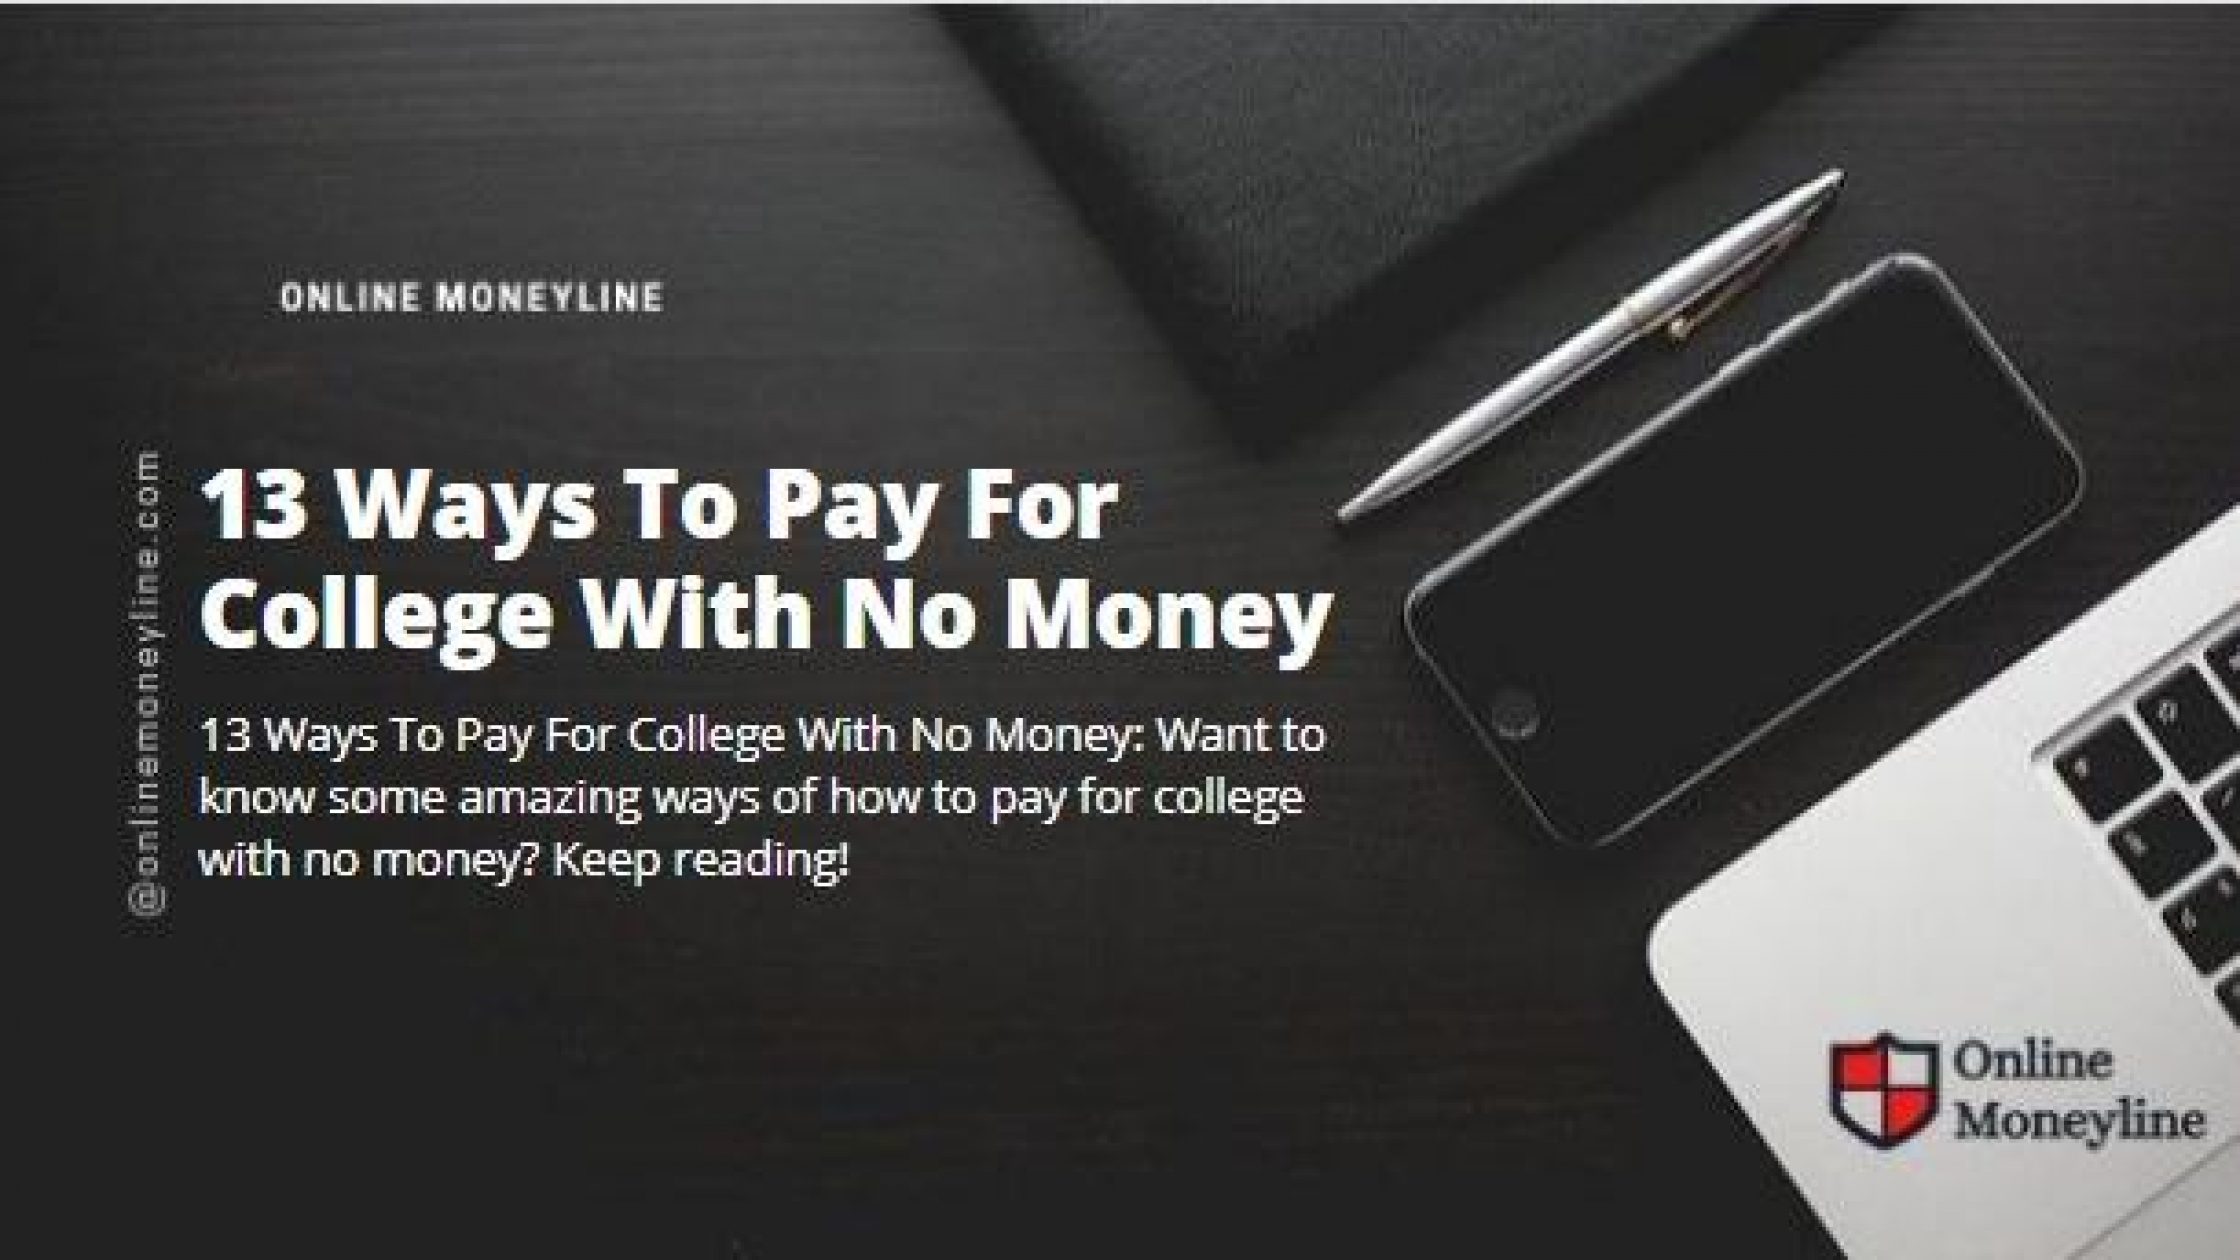 13 Ways To Pay For College With No Money